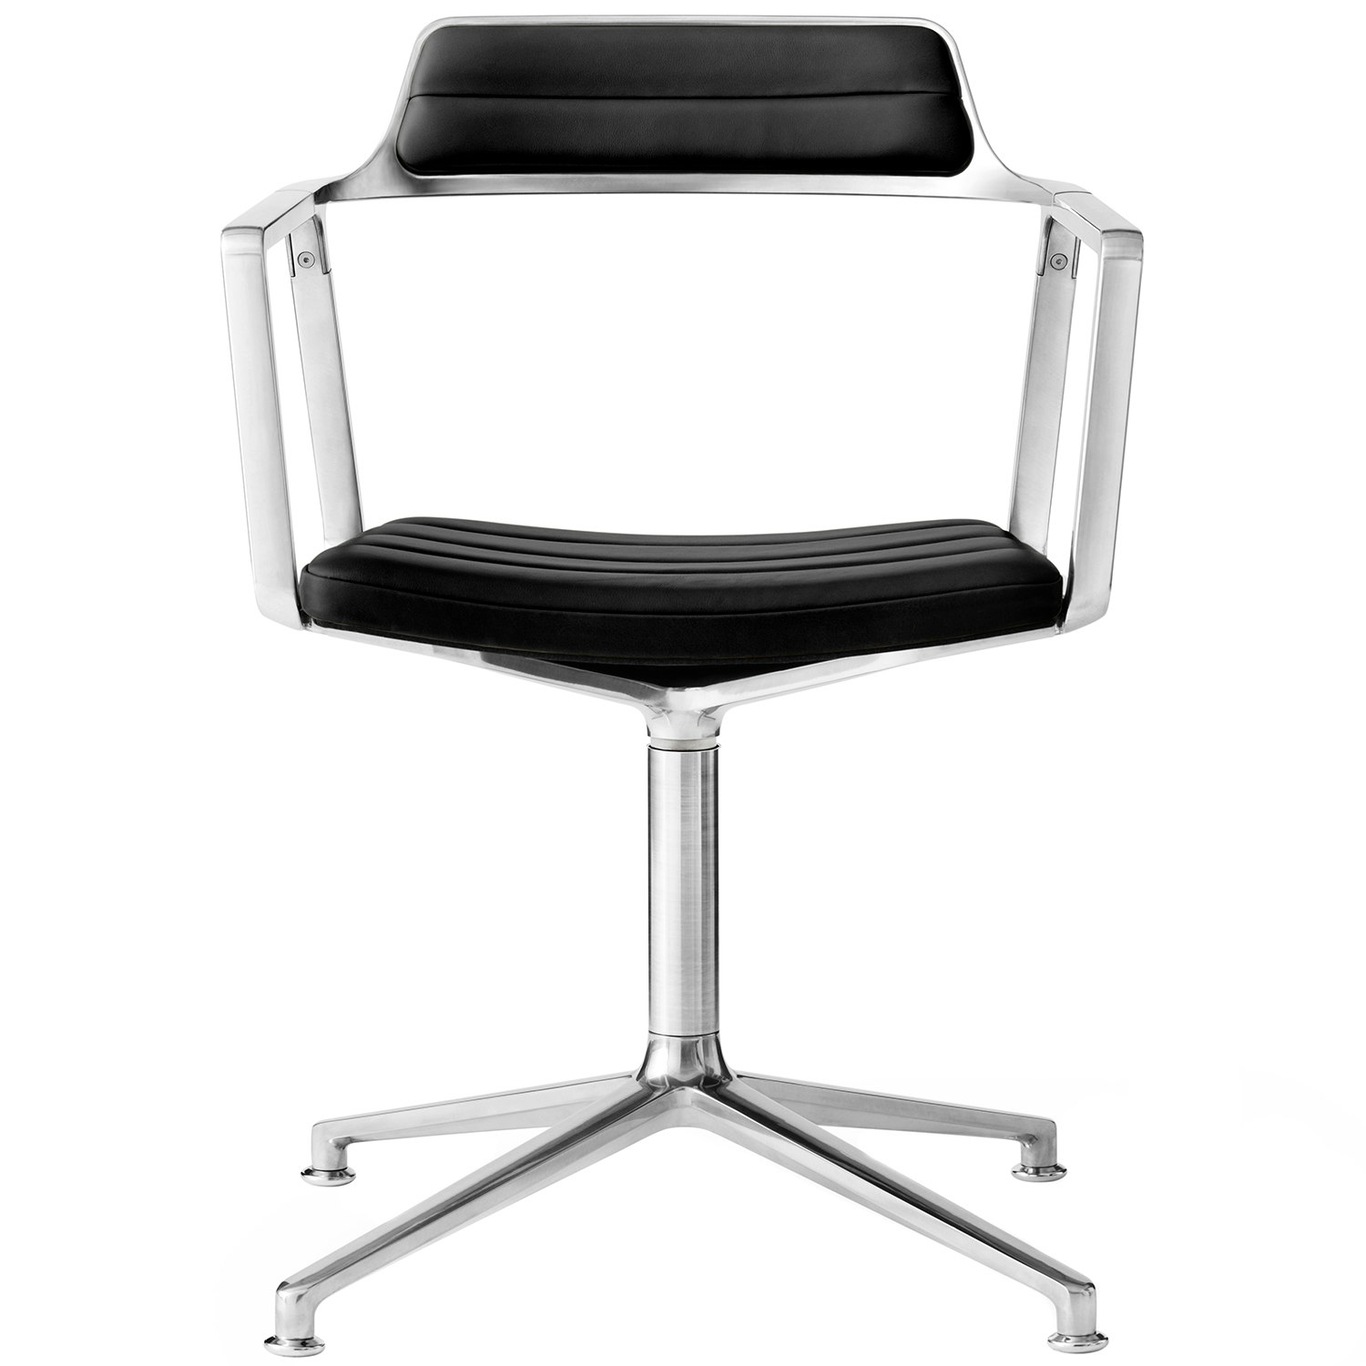 452 Swivel Chair With Feet, Polished Aluminium / Black Leather